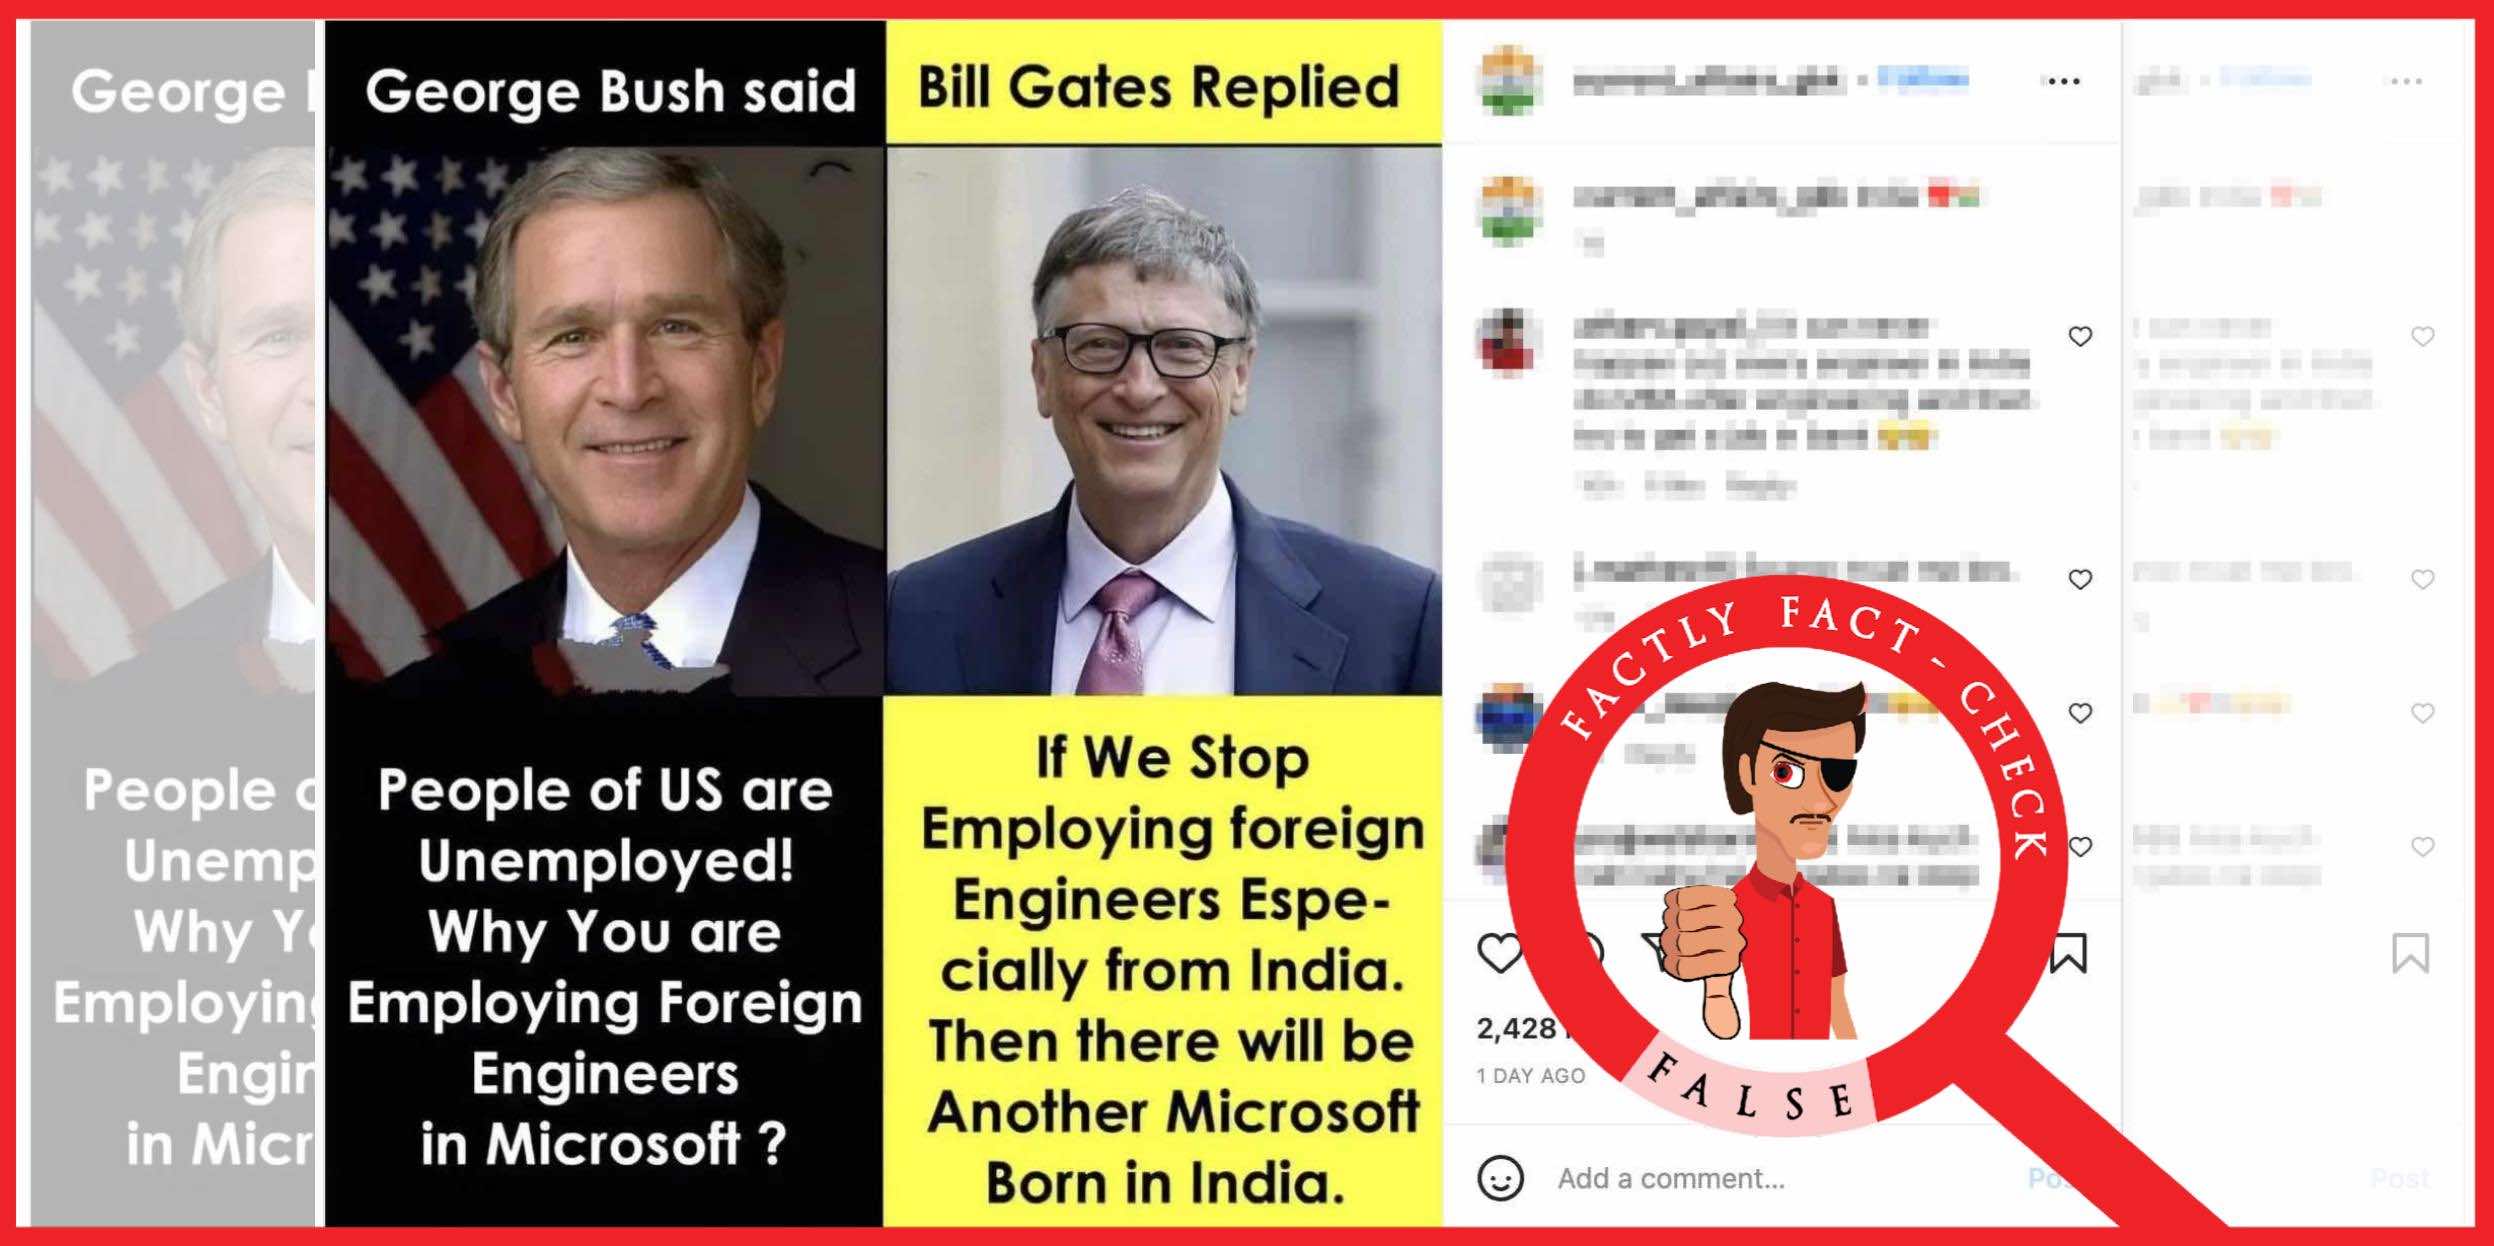 This post attributes a made-up statement to Bill Gates as the reason for hiring Indian employees at Microsoft